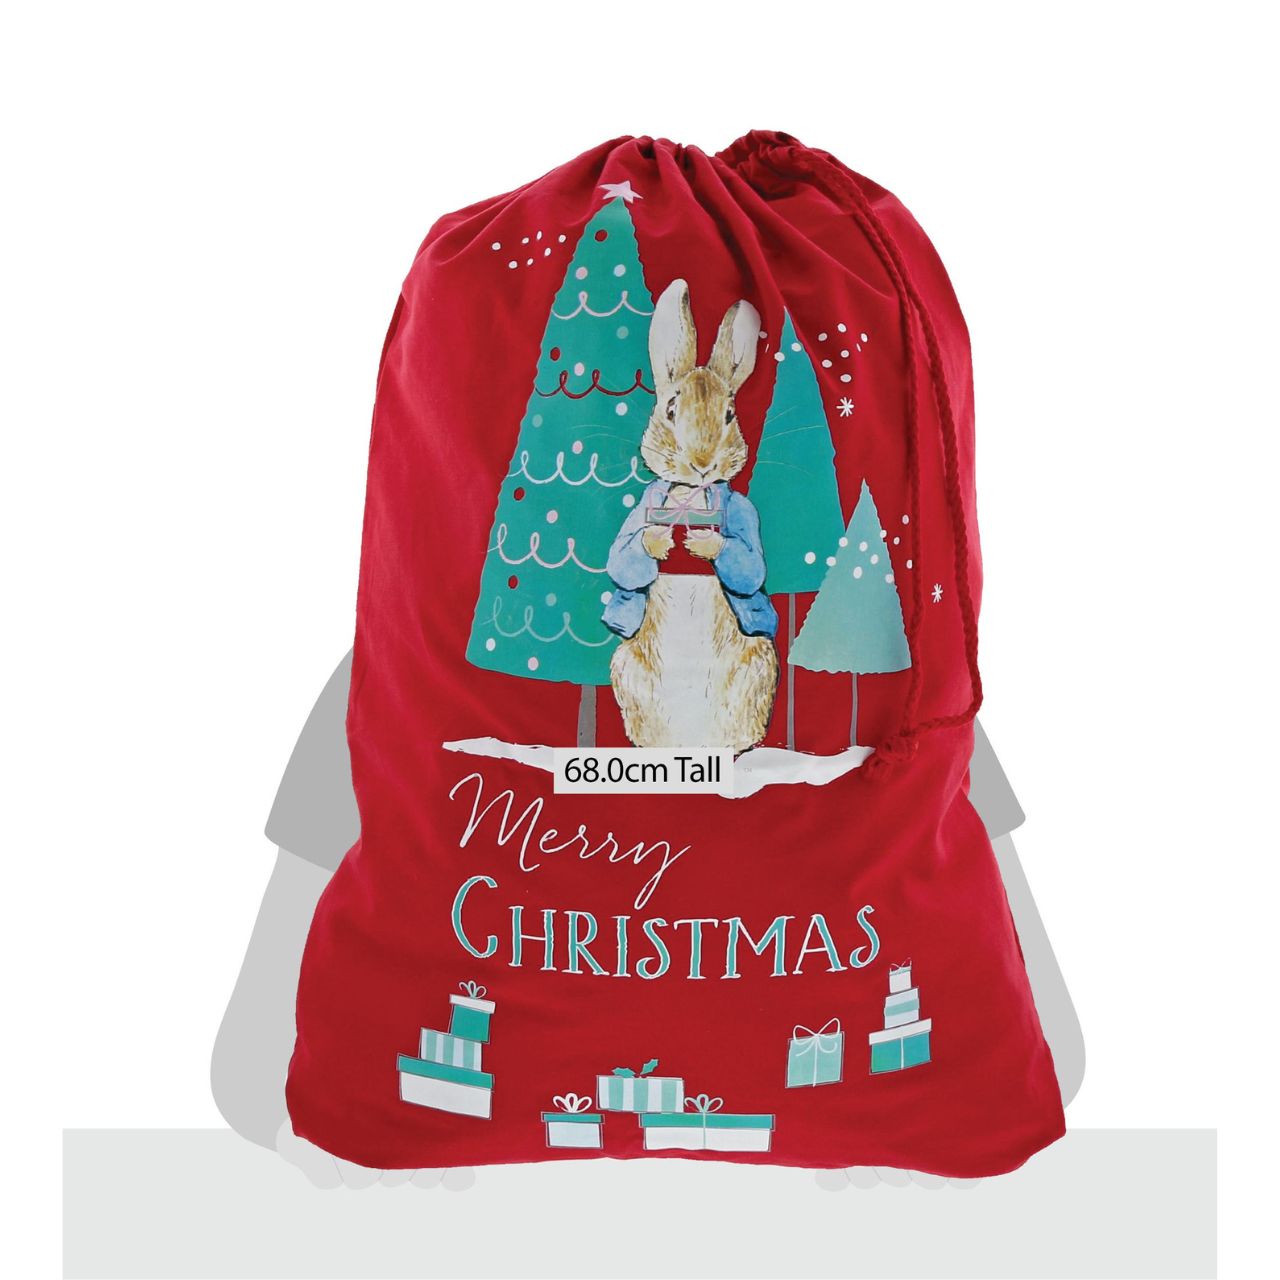 Beatrix Potter Peter Rabbit Christmas Sack  This Charming Peter Rabbit Christmas sack makes a brilliant alternative to a Christmas stocking, so why not make a new tradition this Christmas. Made of 100% cotton, this Christmas sack is durable and can be used year after year. It is large enough to fit lots of presents in for Christmas morning and looks great underneath the tree.